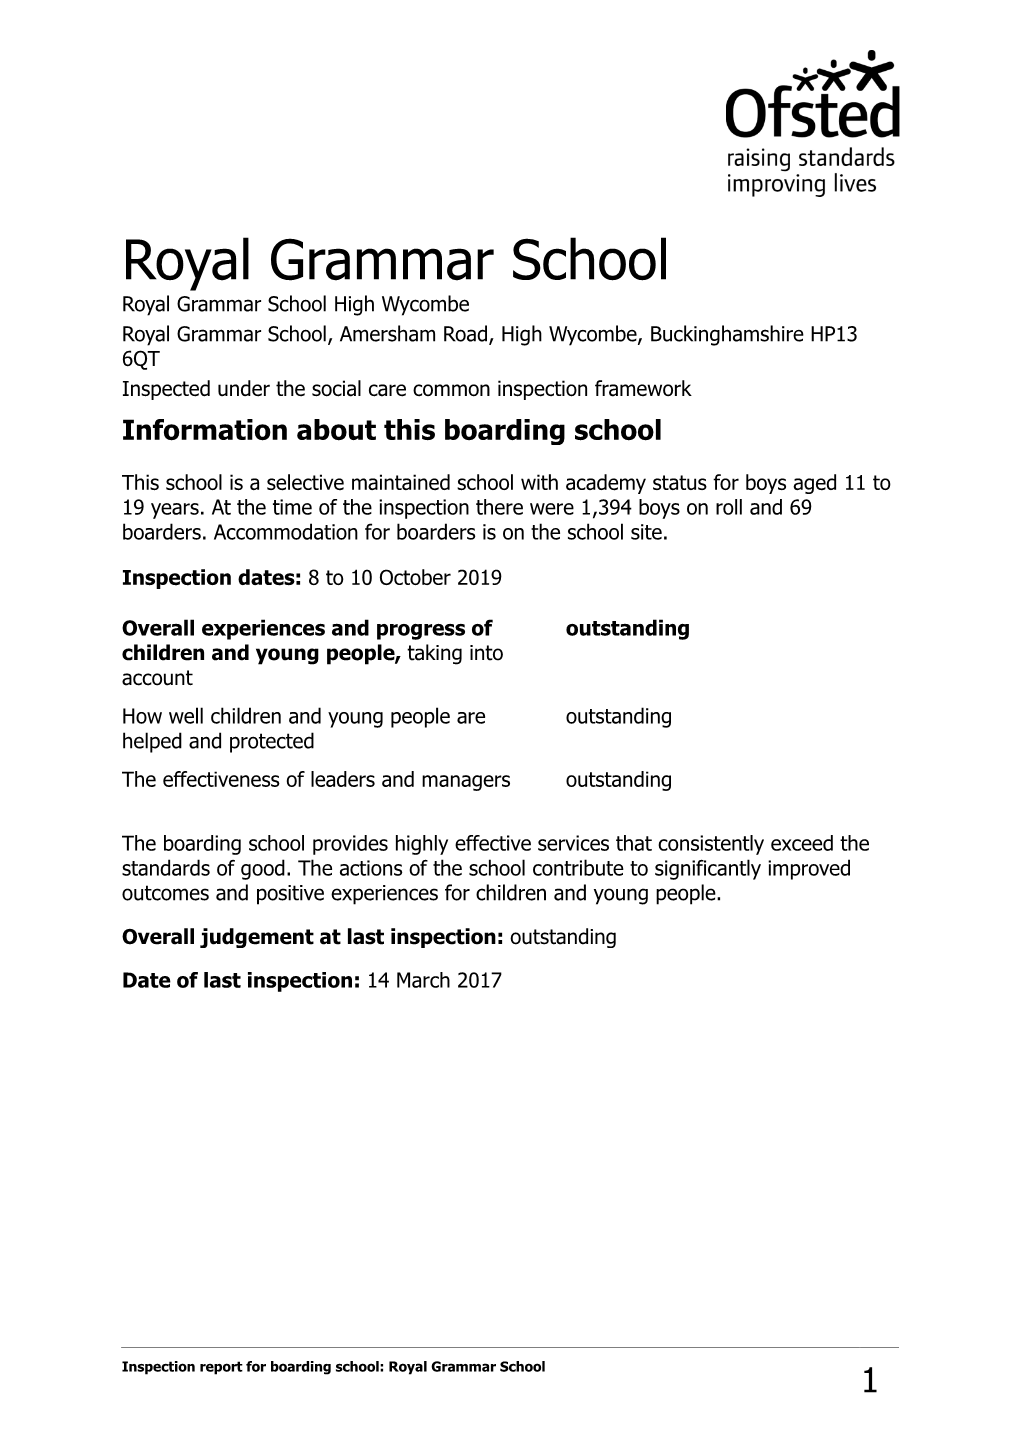 Ofsted Boarding Report